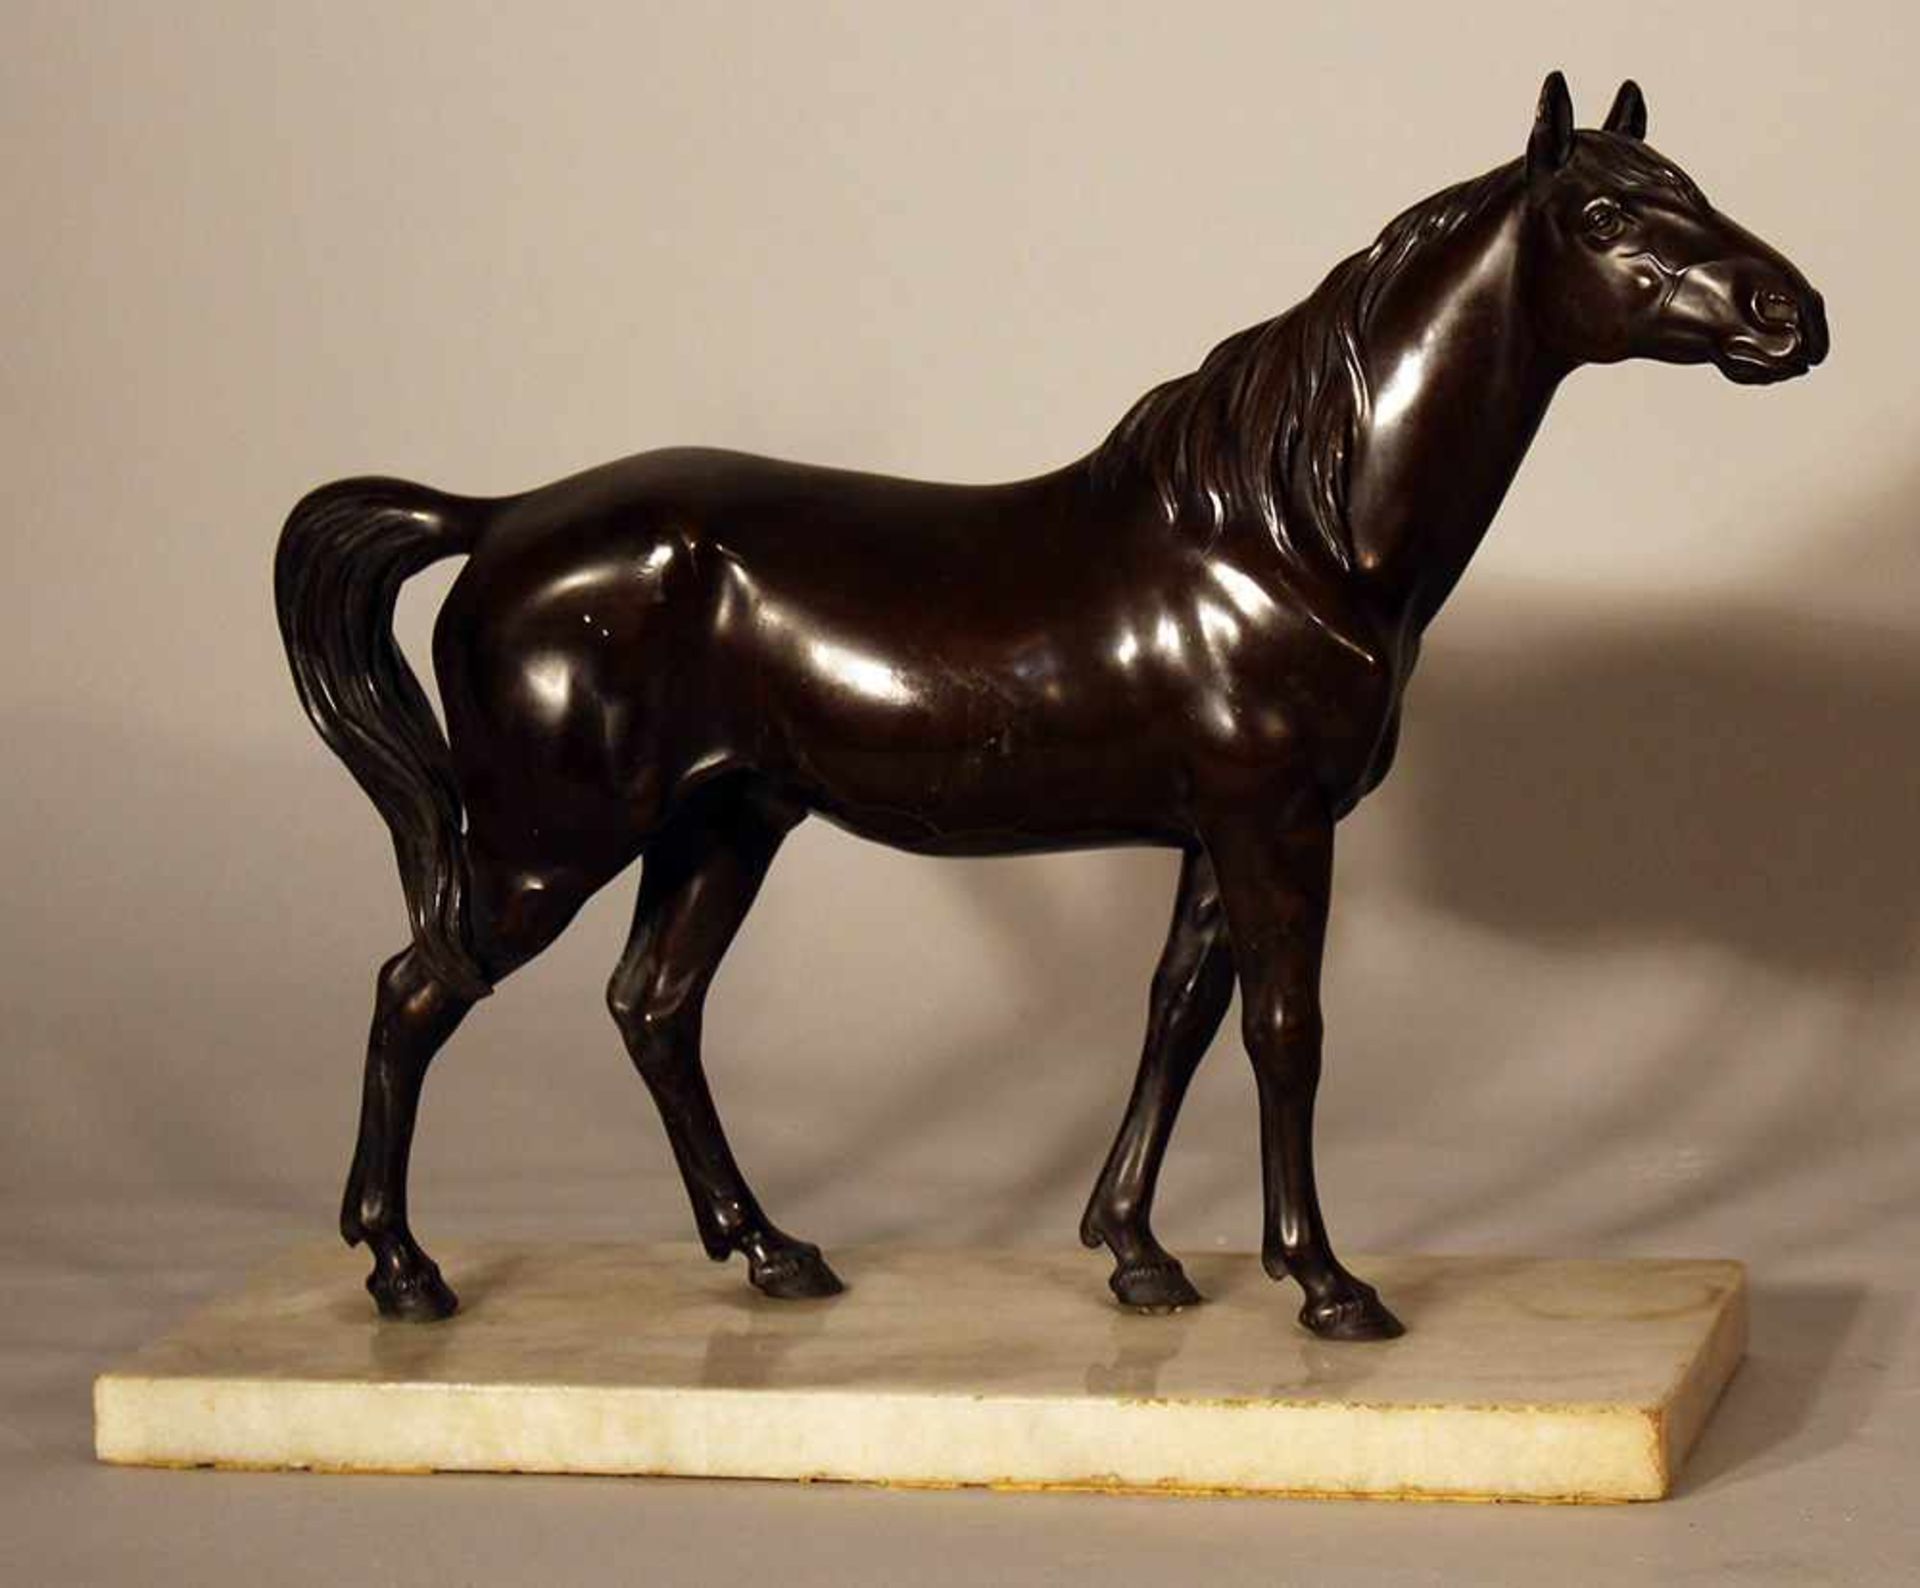 Bronze sculpture of a standing horse looking to the side, on white marble base; bronze cast with